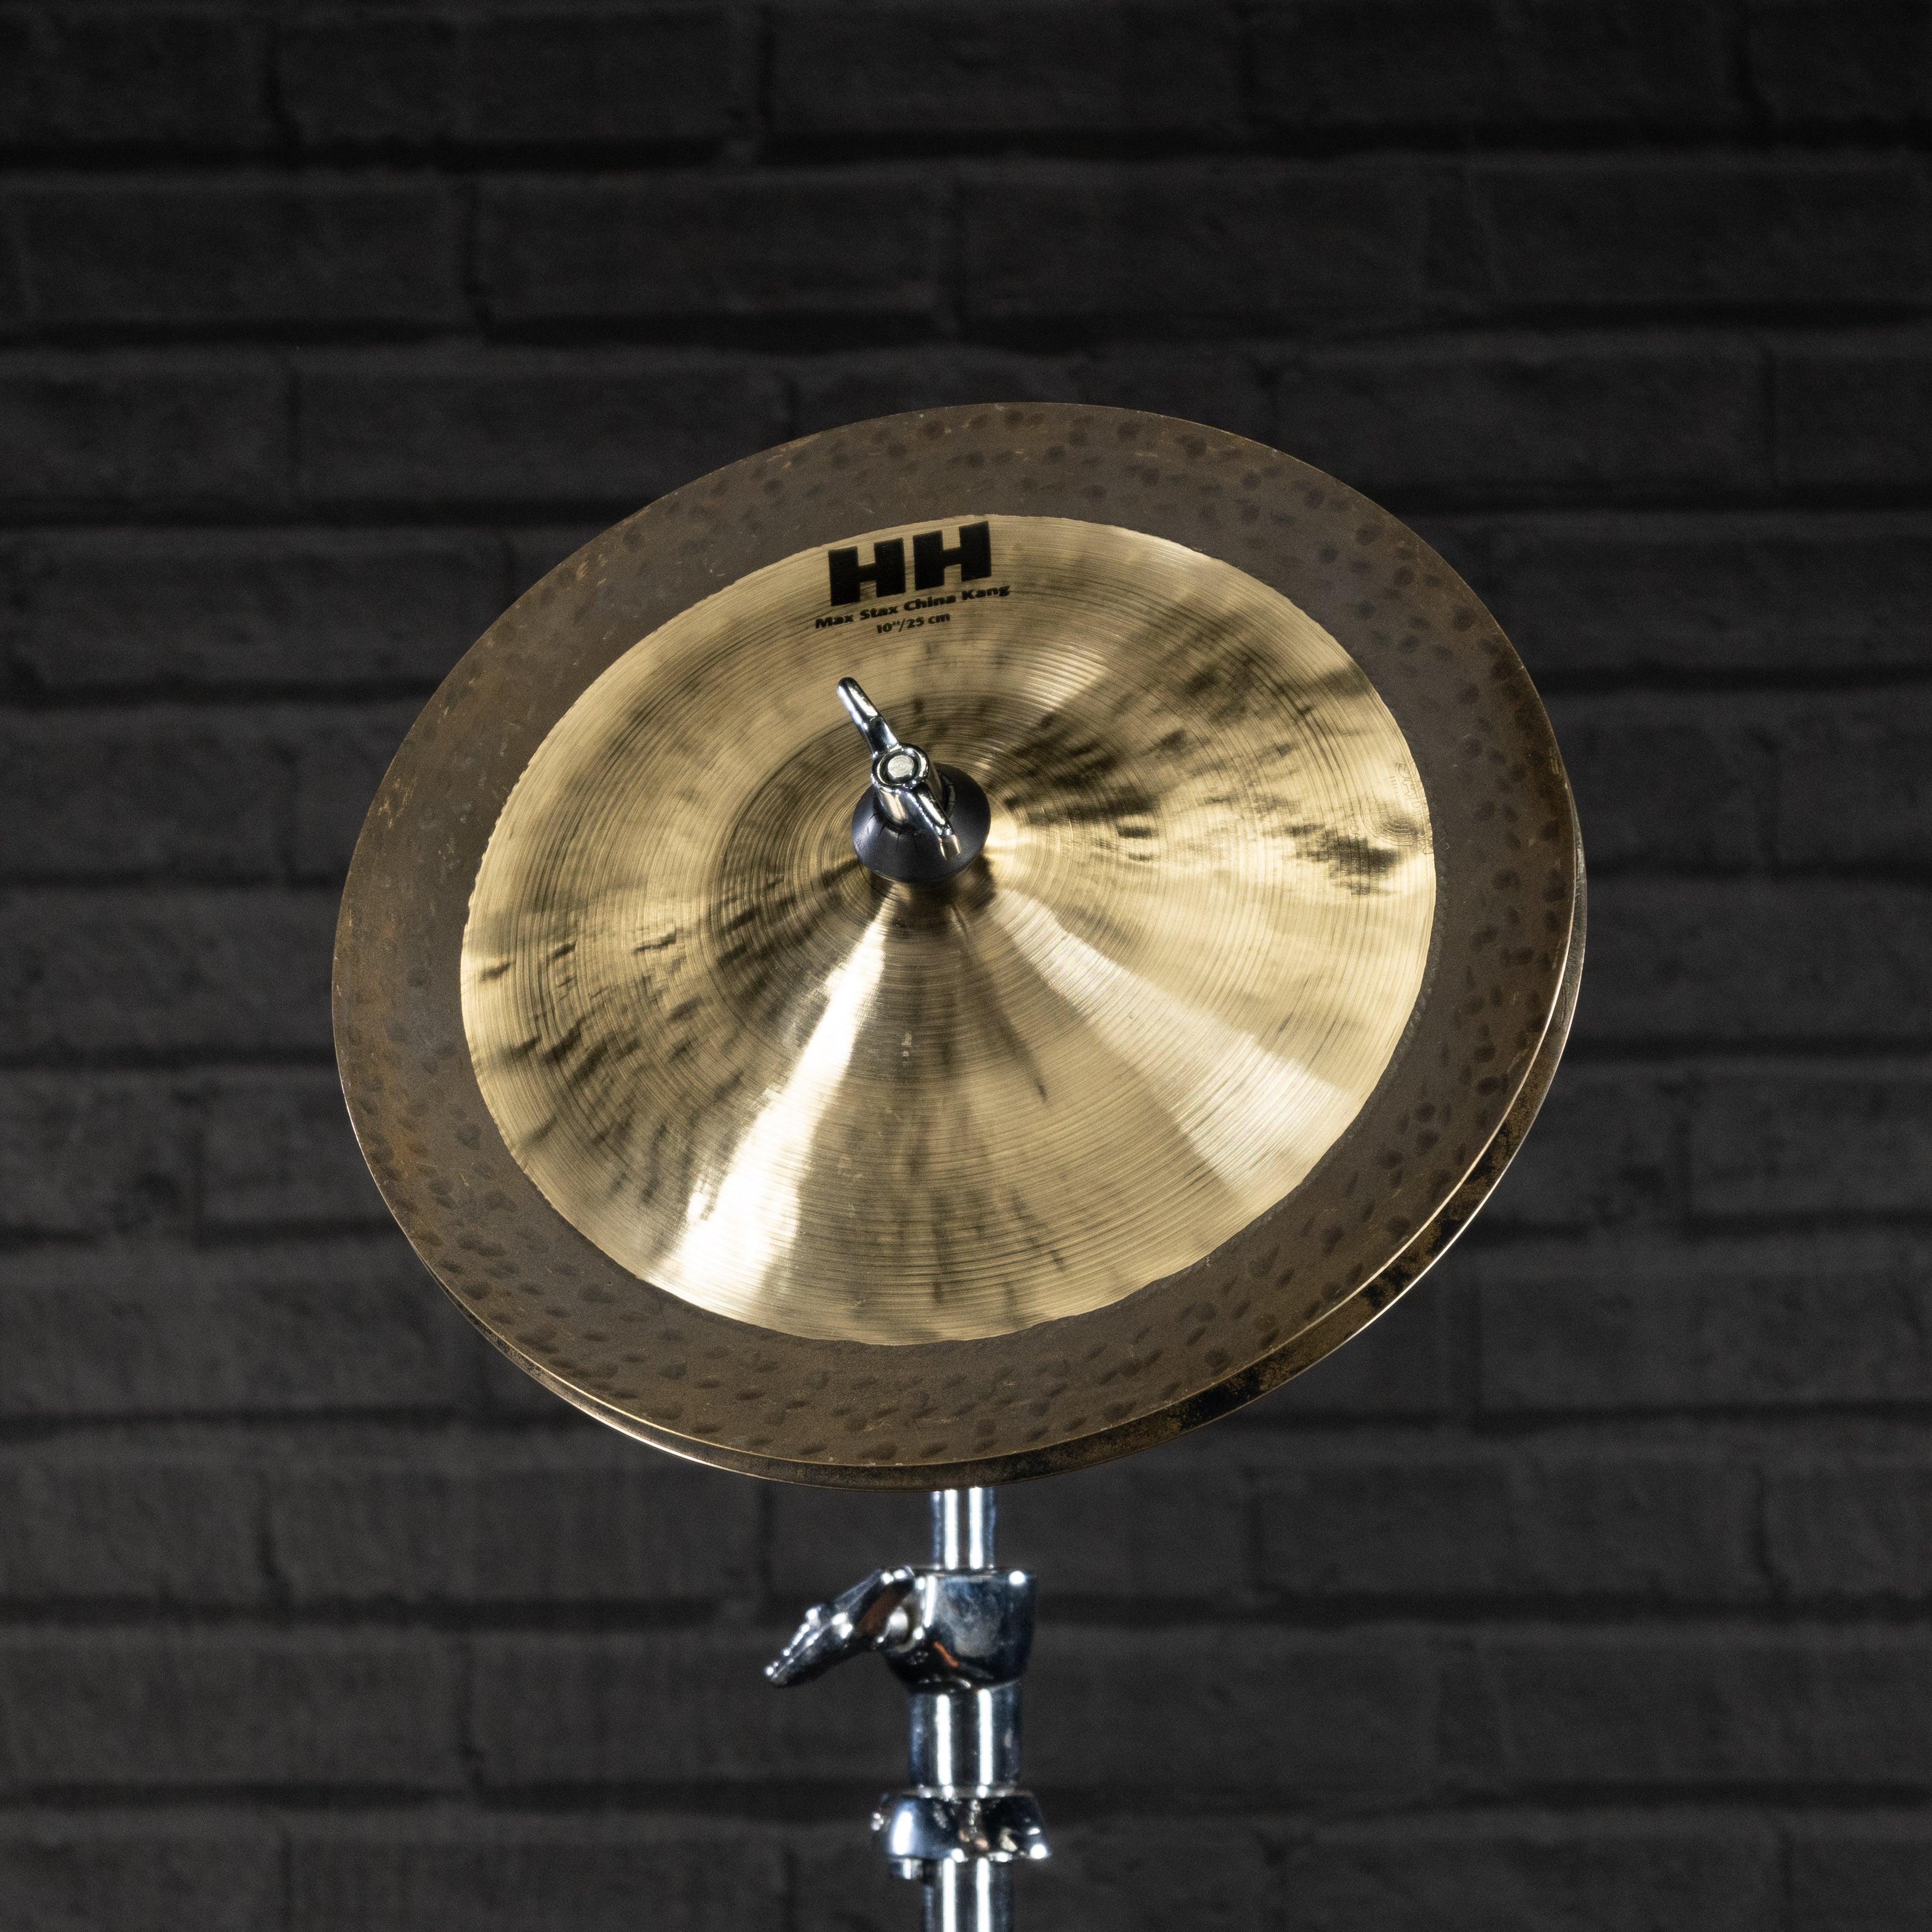 Sabian 10” HH Mid Max Stax USED freeshipping - Impulse Music Co.